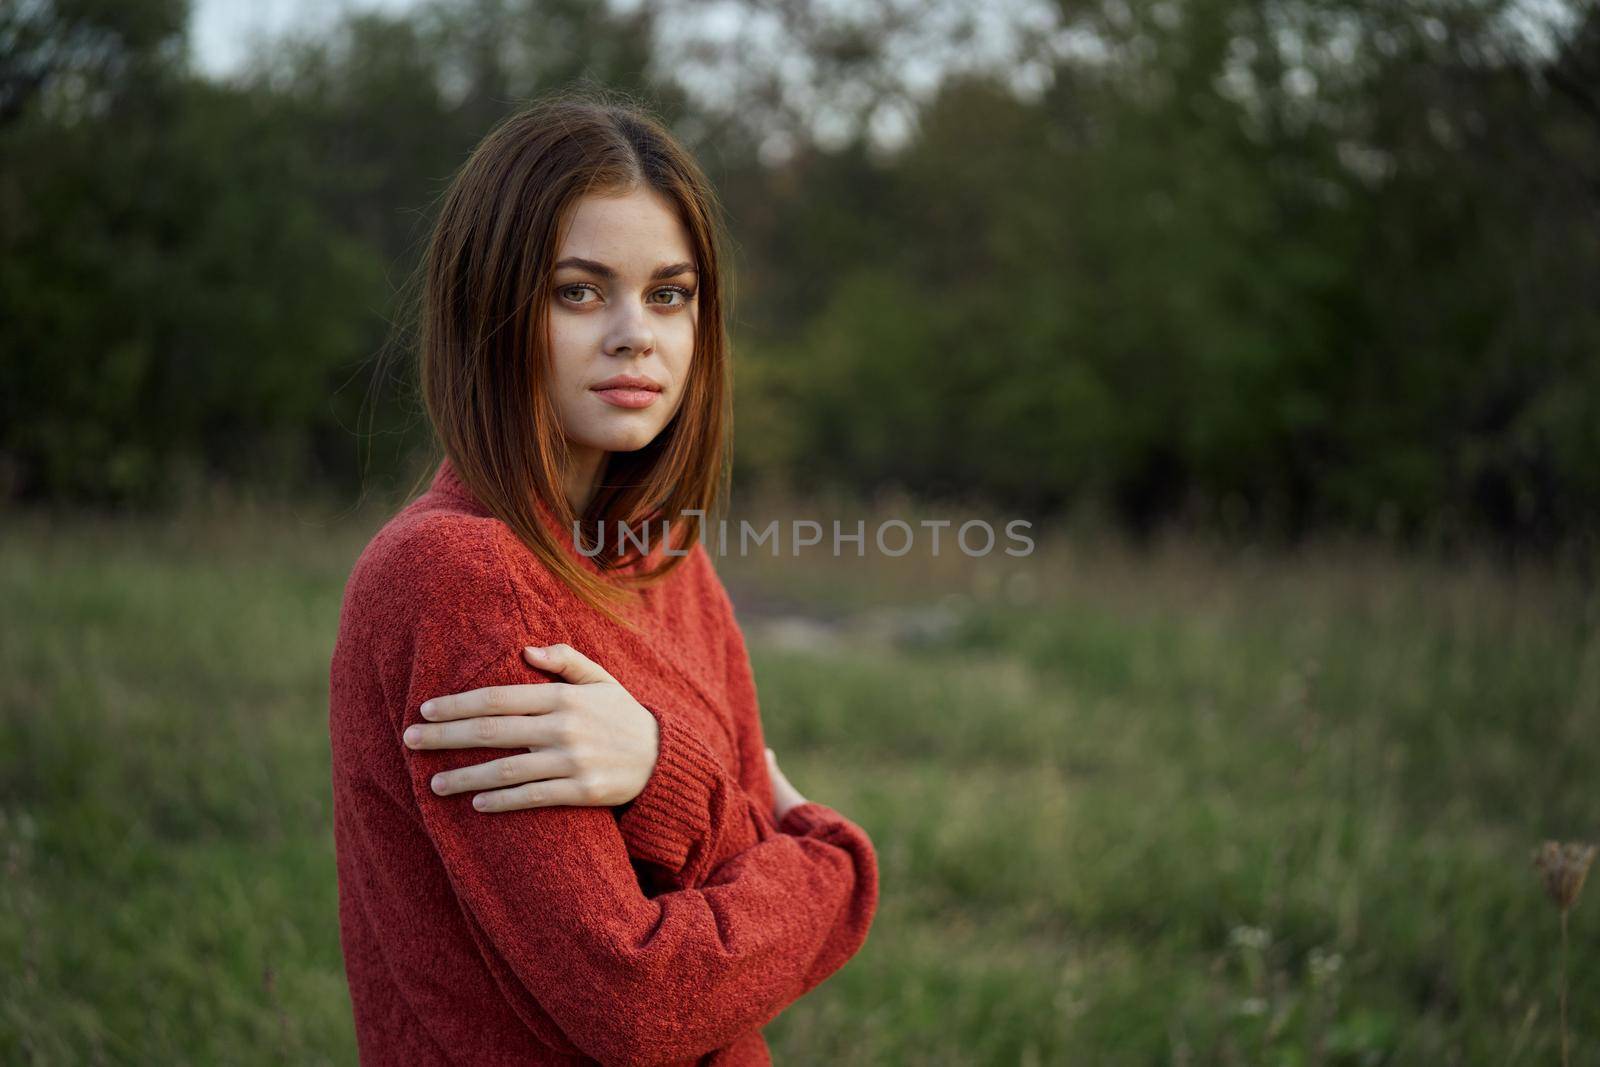 woman in a red sweater outdoors in the field nature rest by Vichizh